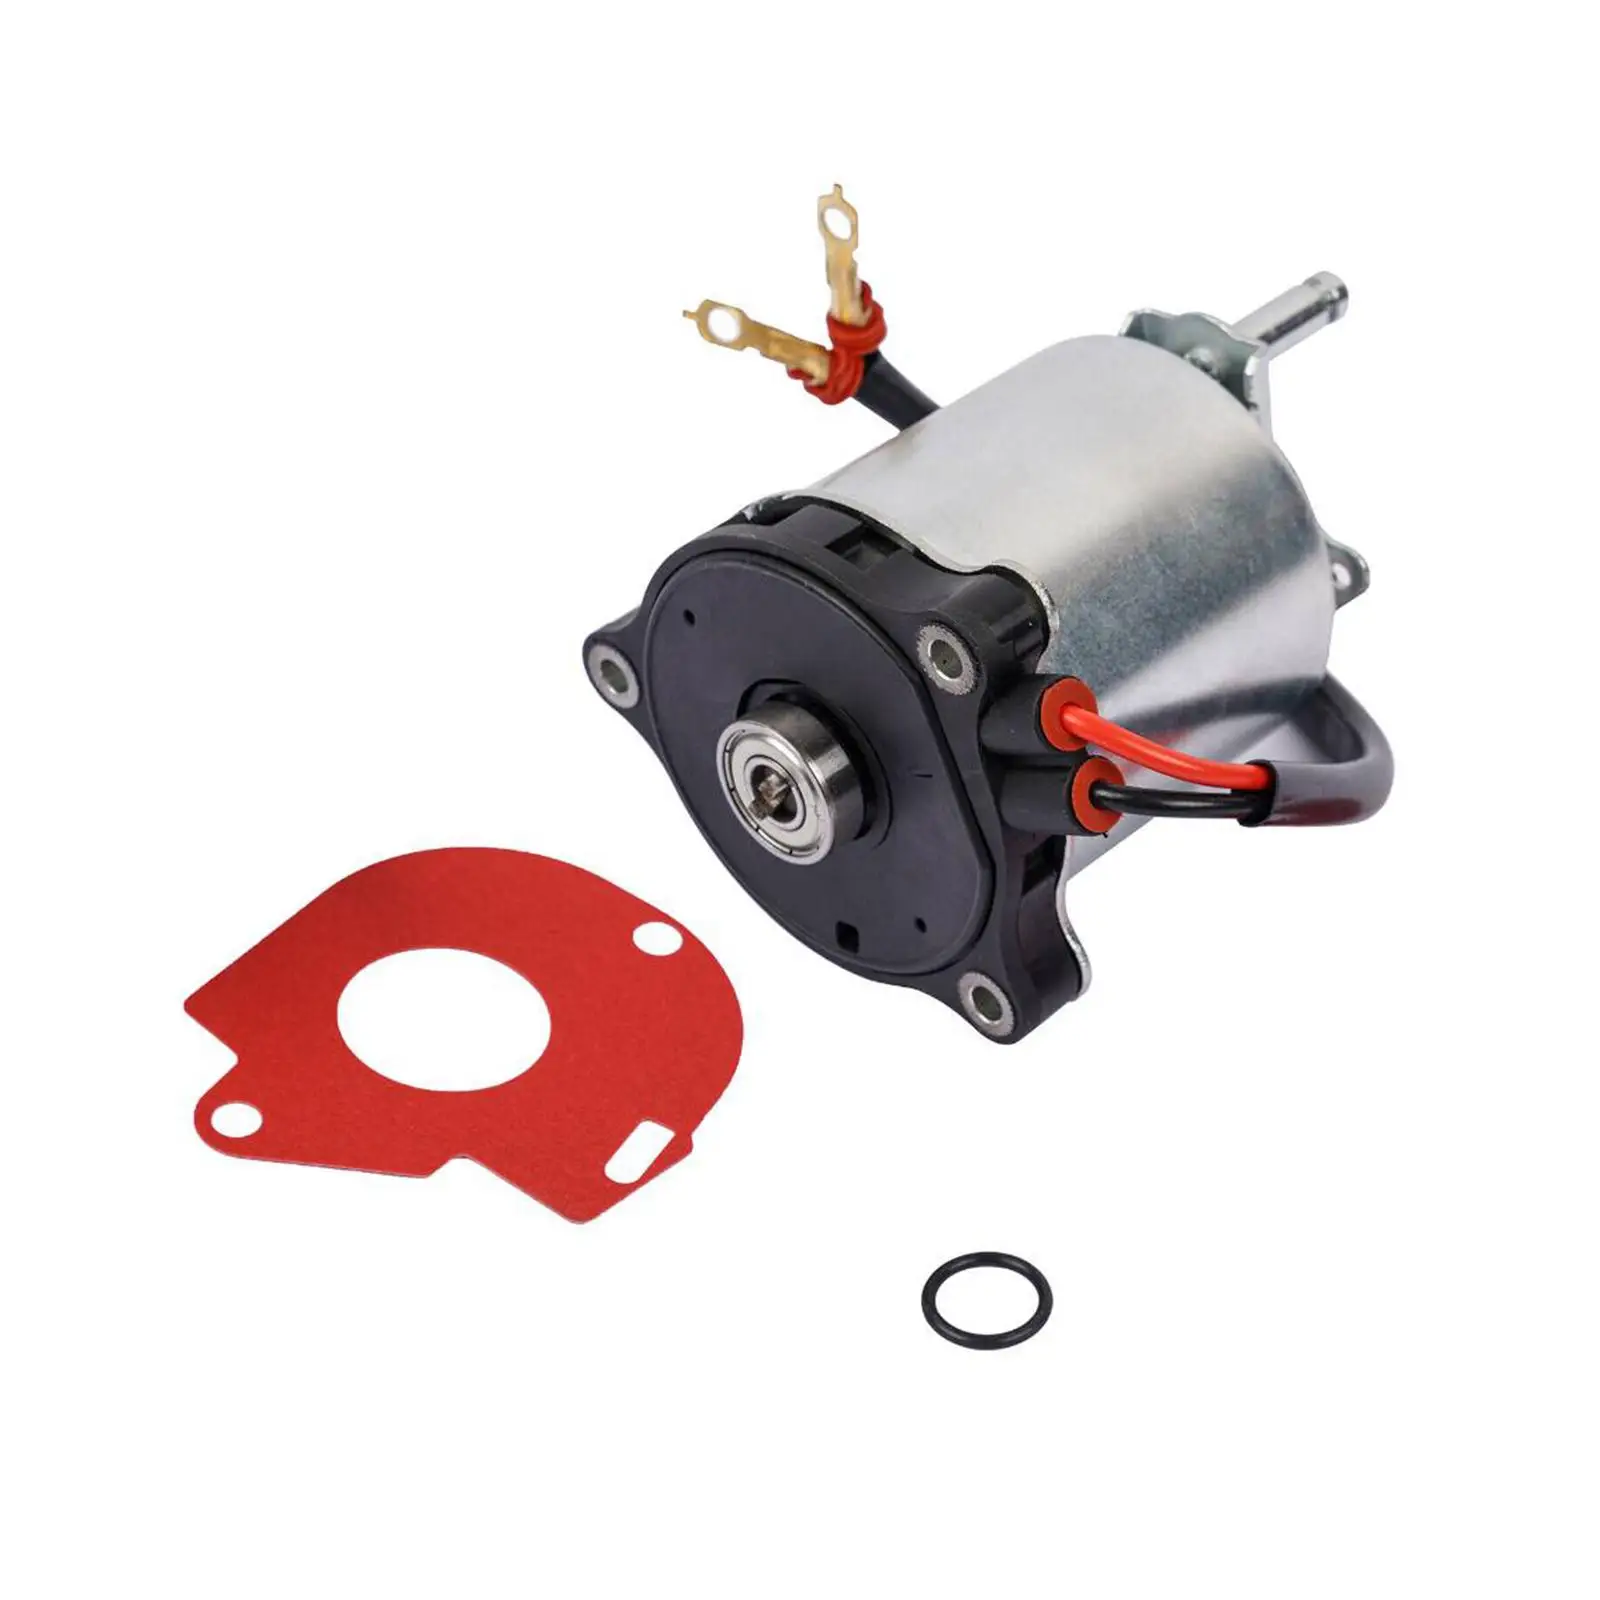 ABS Brake Booster Pump Motor 47960 60050 for Toyota LX450D for land cruiser